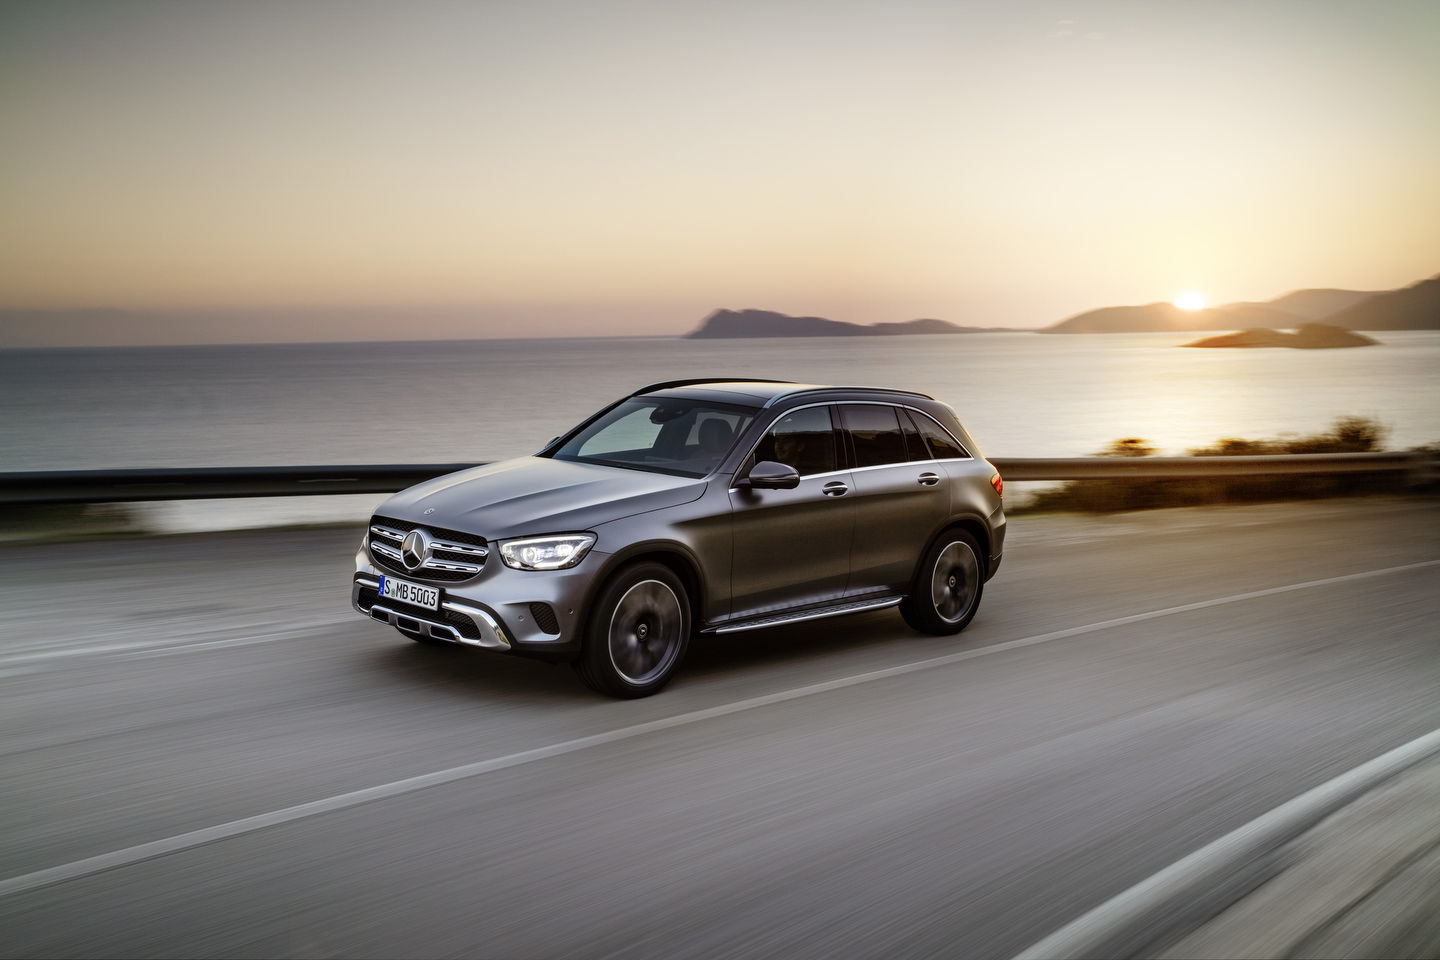 2018 to 2022 Mercedes-Benz GLC pre-owned vehicle buying guide